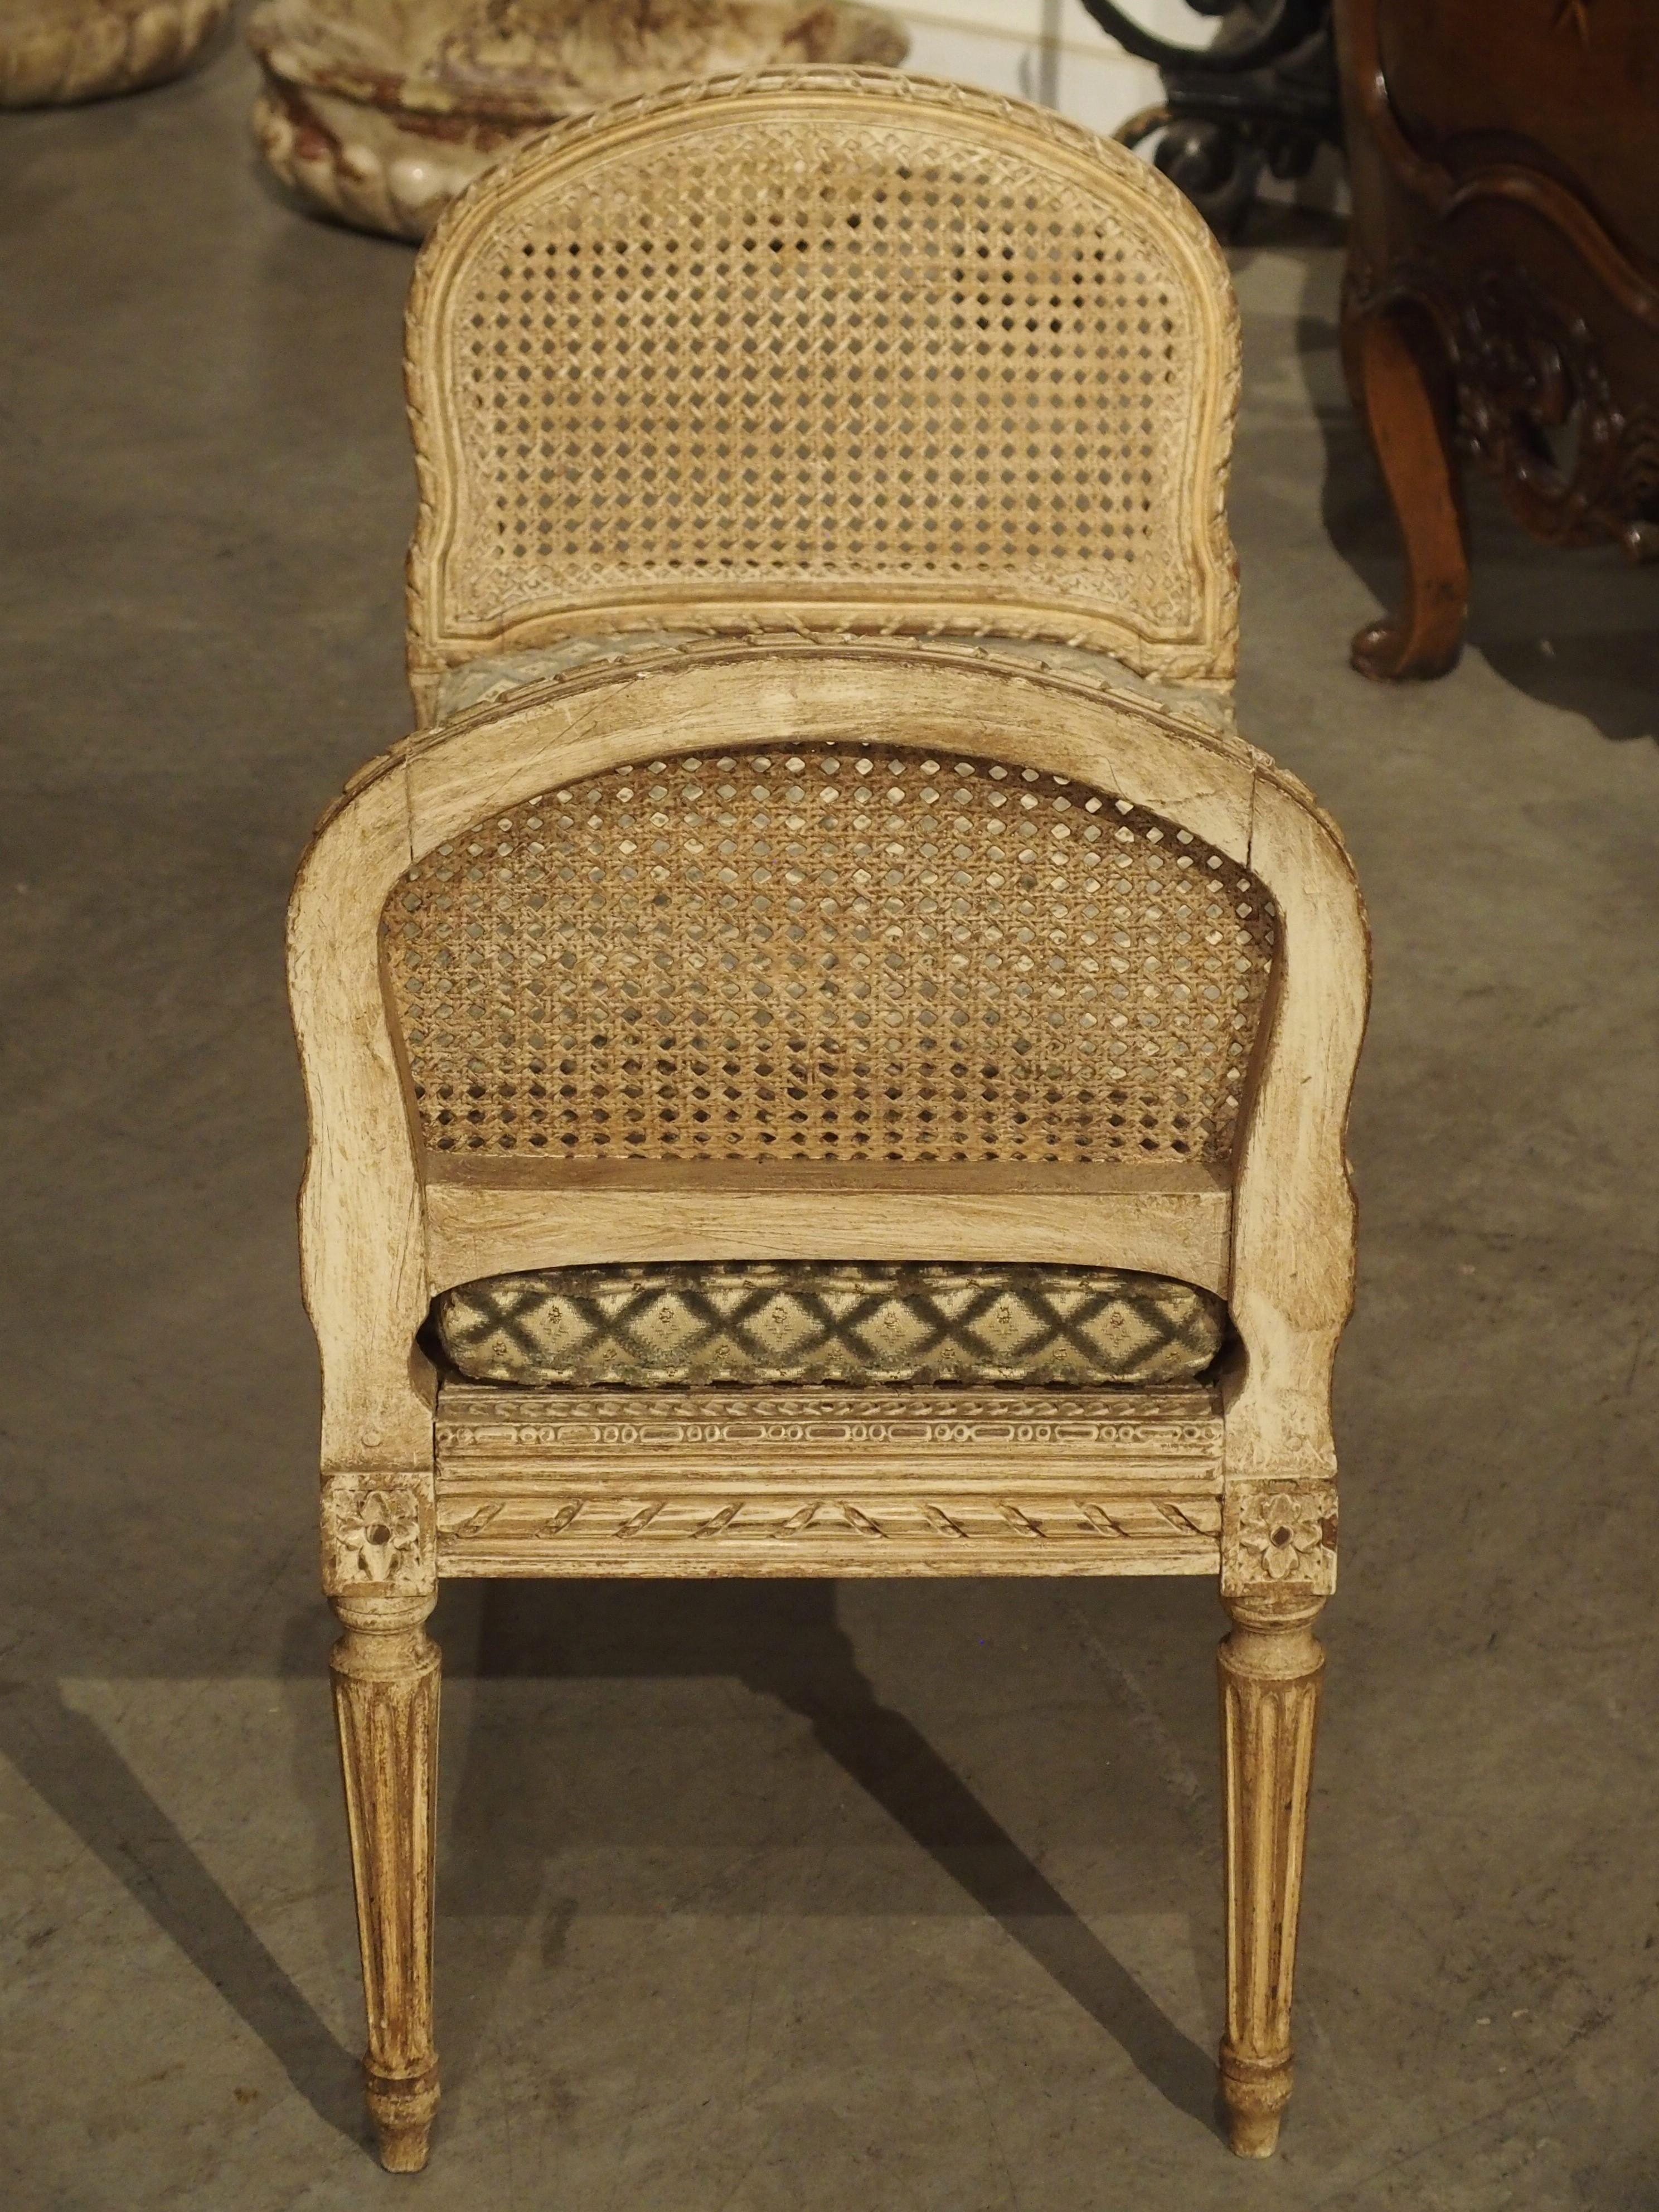 This small caned and painted banquette is from France, circa 1890. Banquettes originated in the 15th century and were designed to be light enough to be transported easily.

A plush cream-colored velvet cushion with green latticework covers the